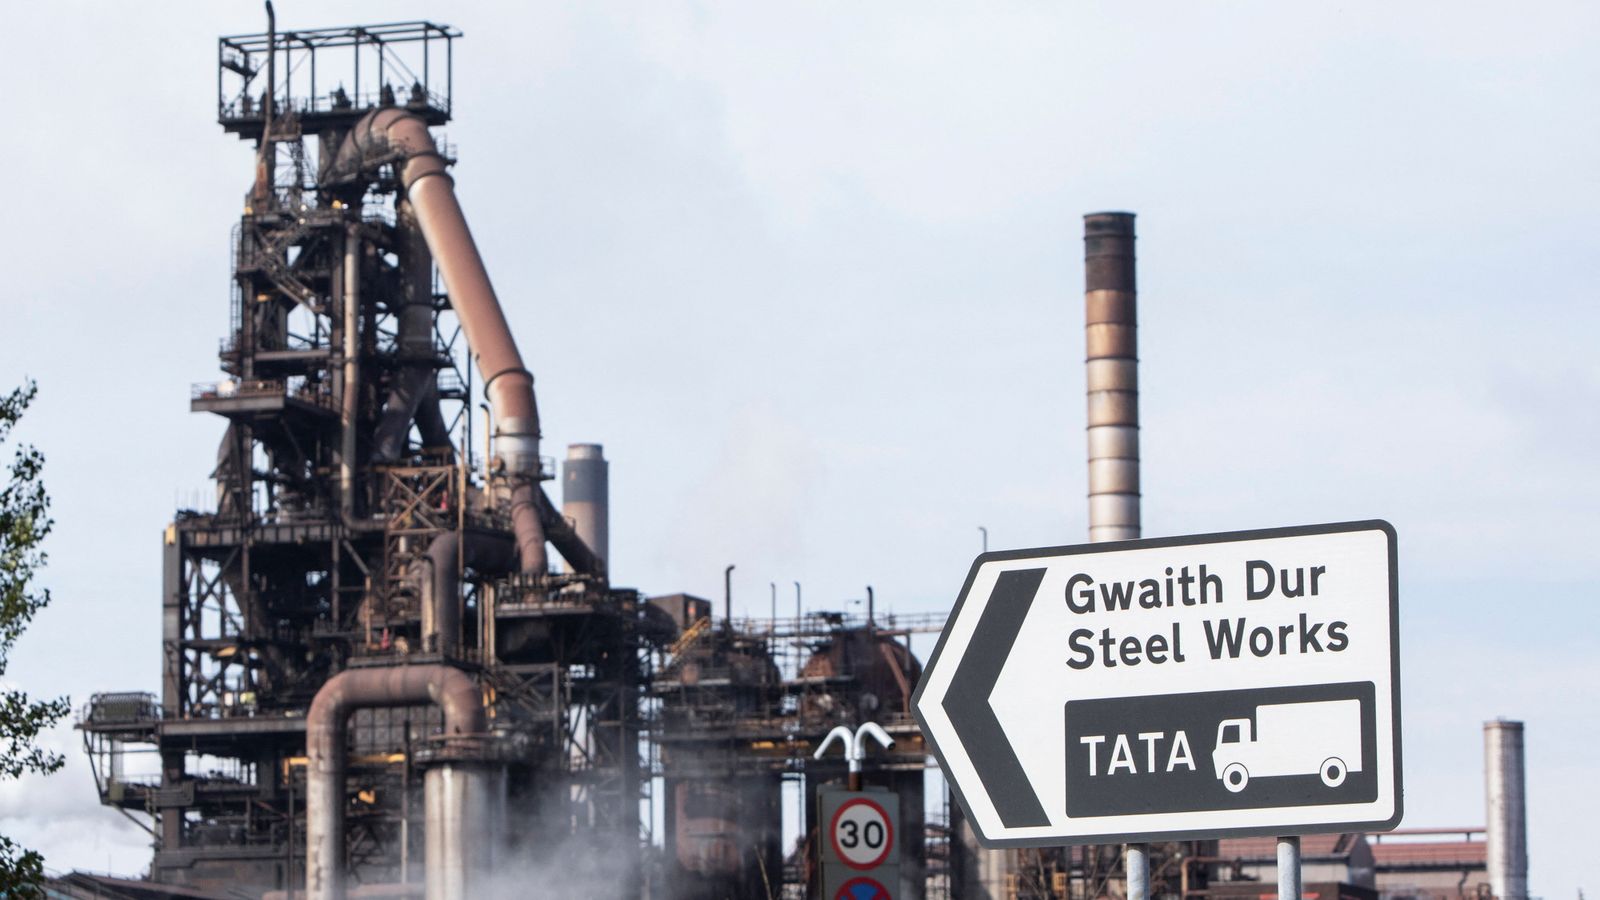 Tata Steel: 2,800 jobs axed at Port Talbot under taxpayer-funded electric shift